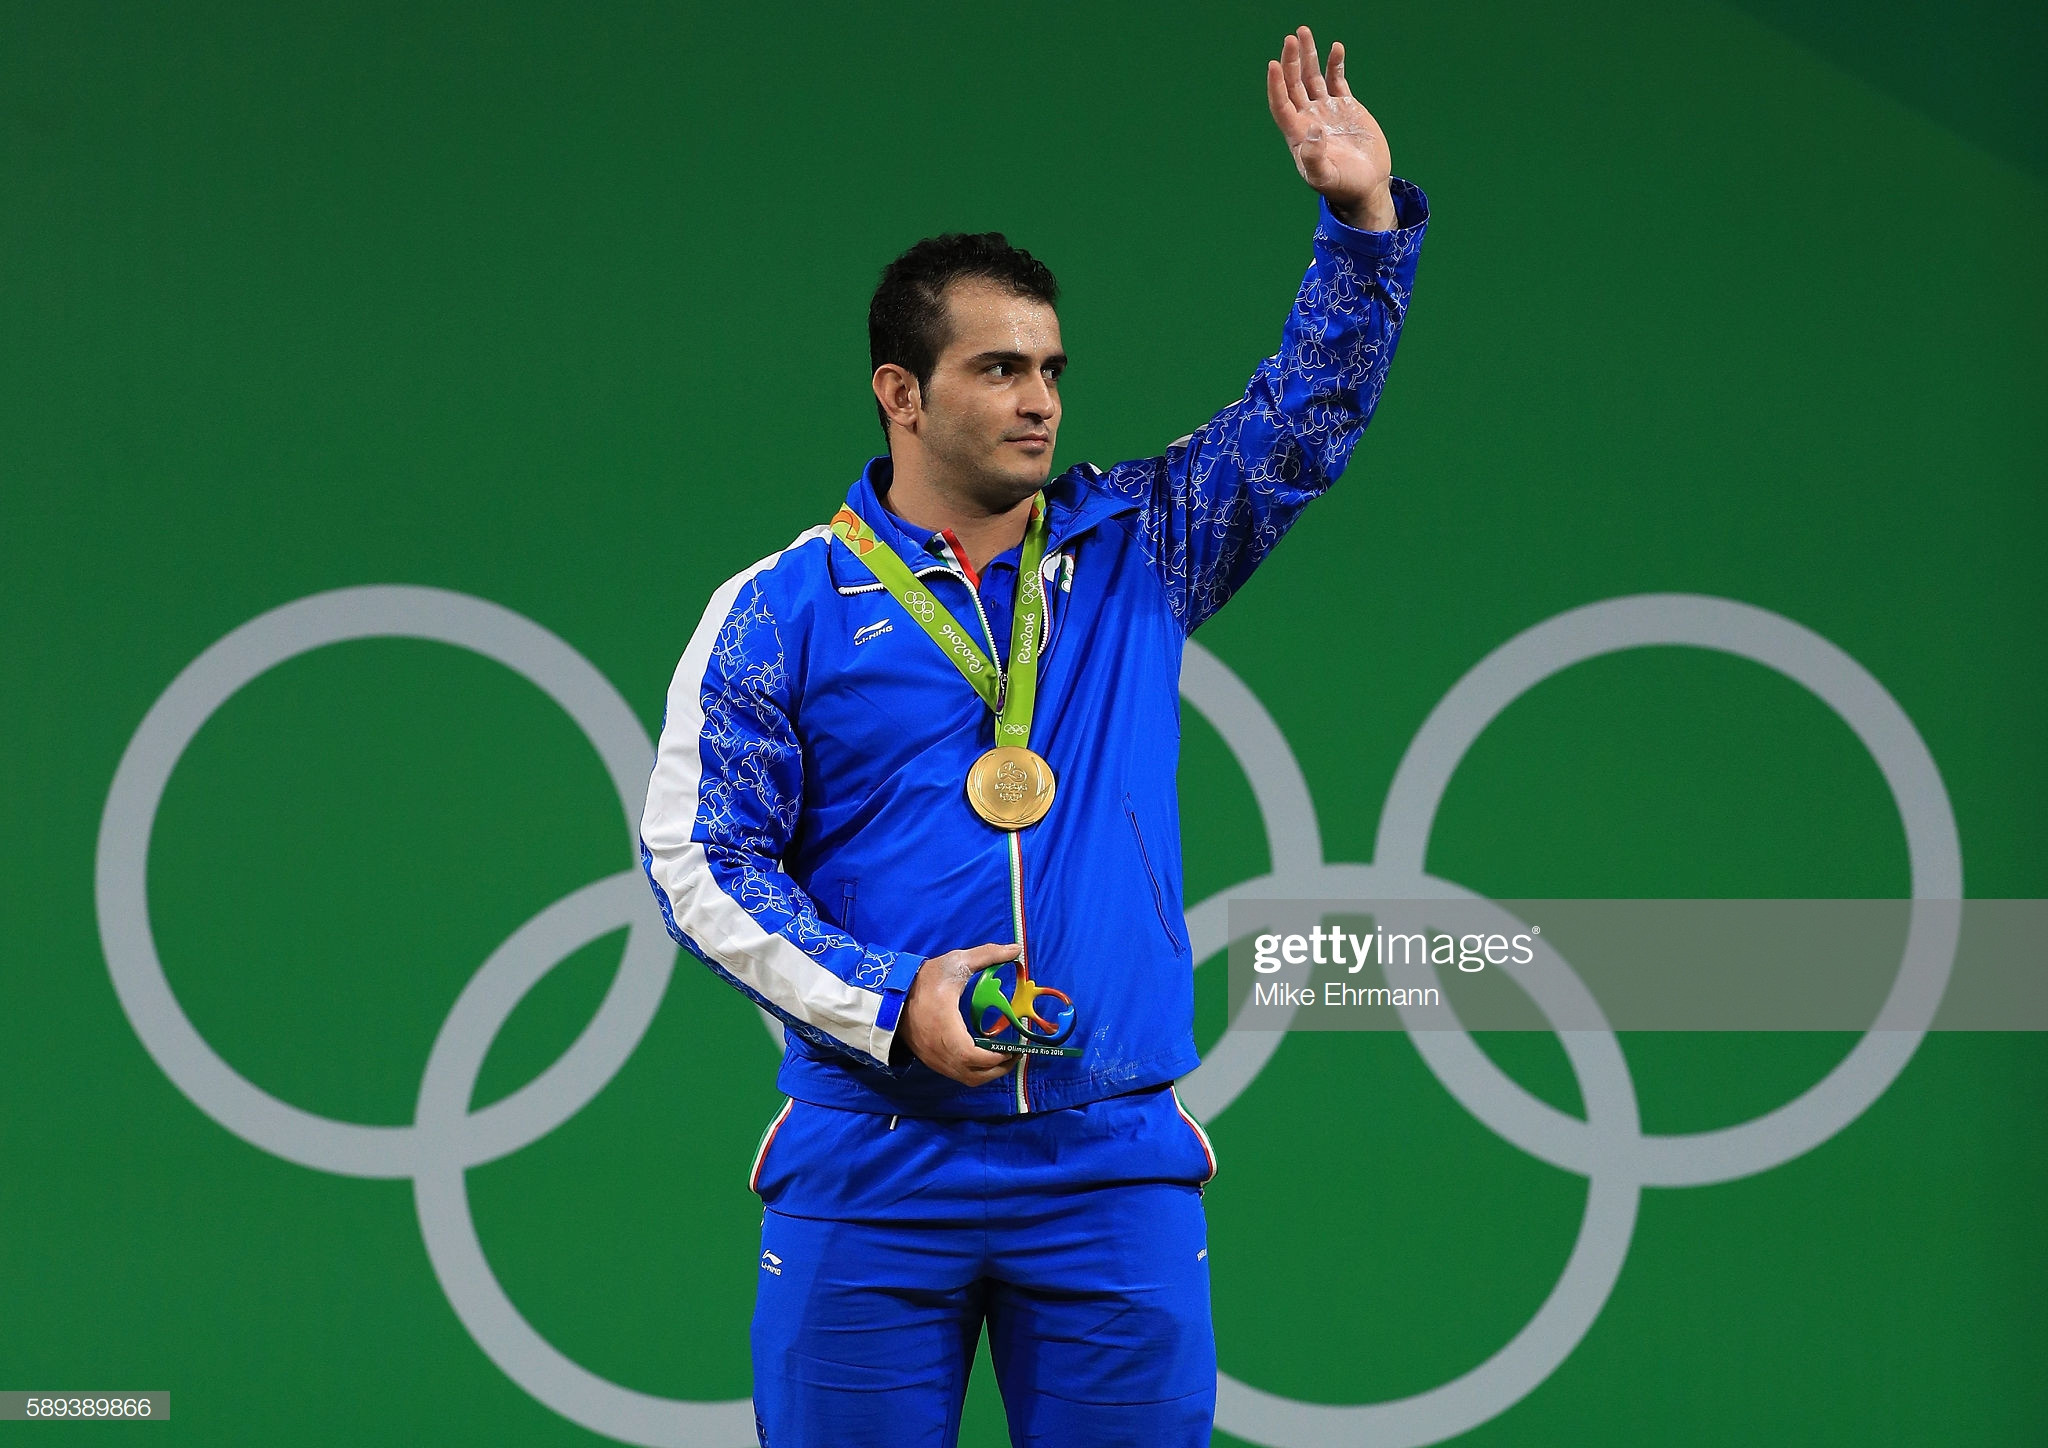 Sohrab Moradi could yet make the Tokyo 2020 Olympic Games as one of Iran's weightlifters © Getty Images